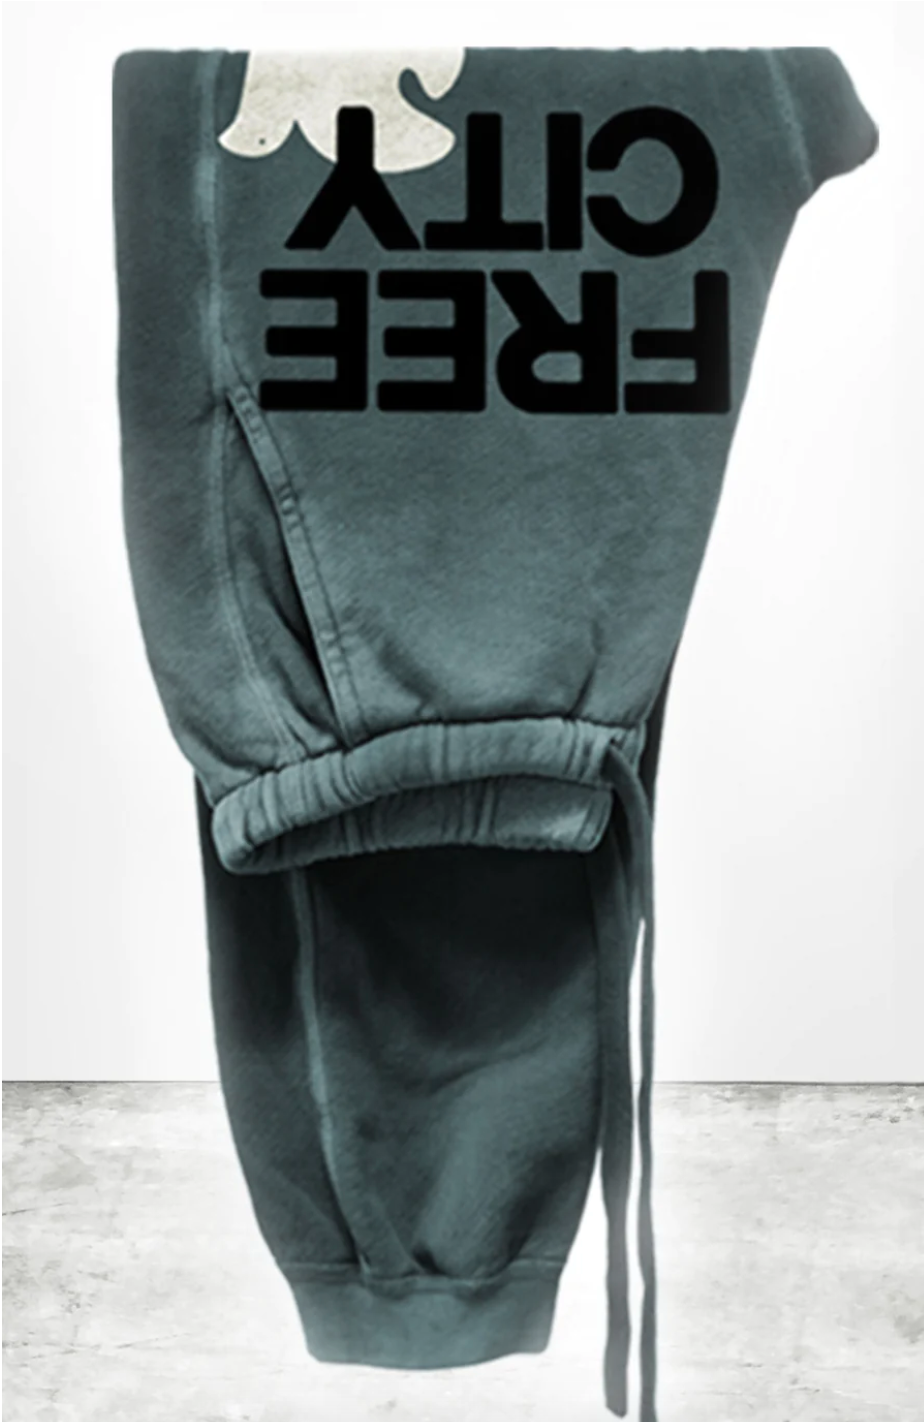 A teal sweatpant with the words "FREECITY" printed in black block letters, made from lightweight French terry, hanging on a wall. The image has a grayish concrete floor visible at the bottom.